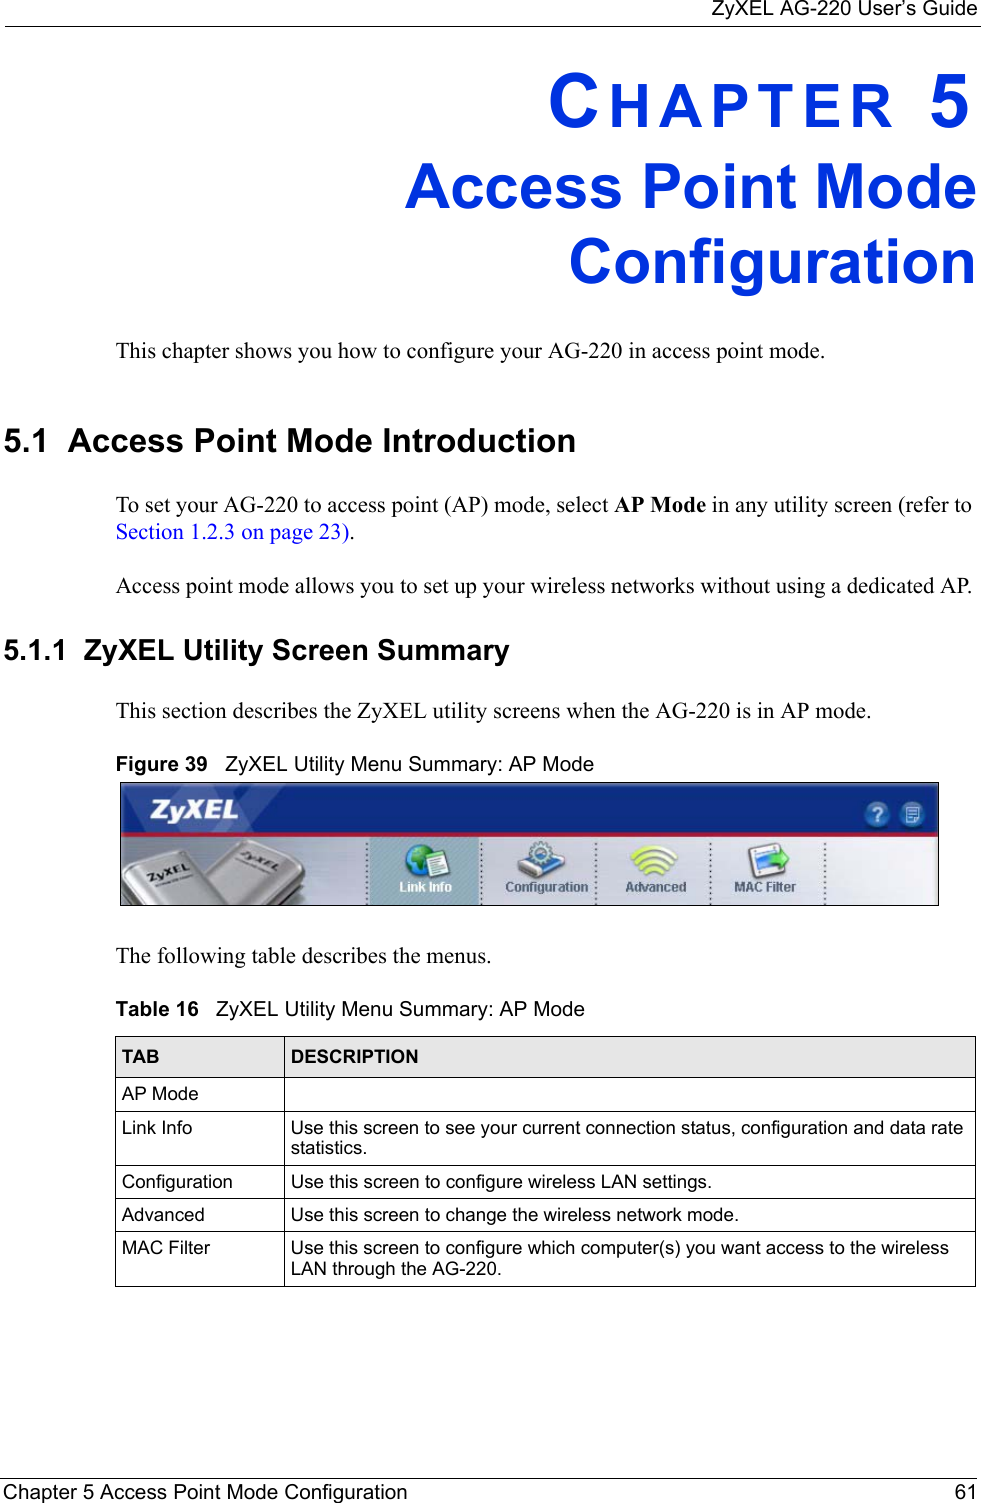 ZyXEL AG-220 User’s GuideChapter 5 Access Point Mode Configuration 61CHAPTER 5Access Point ModeConfigurationThis chapter shows you how to configure your AG-220 in access point mode.5.1  Access Point Mode Introduction To set your AG-220 to access point (AP) mode, select AP Mode in any utility screen (refer to Section 1.2.3 on page 23).Access point mode allows you to set up your wireless networks without using a dedicated AP. 5.1.1  ZyXEL Utility Screen Summary This section describes the ZyXEL utility screens when the AG-220 is in AP mode. Figure 39   ZyXEL Utility Menu Summary: AP Mode The following table describes the menus. Table 16   ZyXEL Utility Menu Summary: AP ModeTAB DESCRIPTIONAP ModeLink Info Use this screen to see your current connection status, configuration and data rate statistics.Configuration  Use this screen to configure wireless LAN settings. Advanced Use this screen to change the wireless network mode.MAC Filter Use this screen to configure which computer(s) you want access to the wireless LAN through the AG-220. 